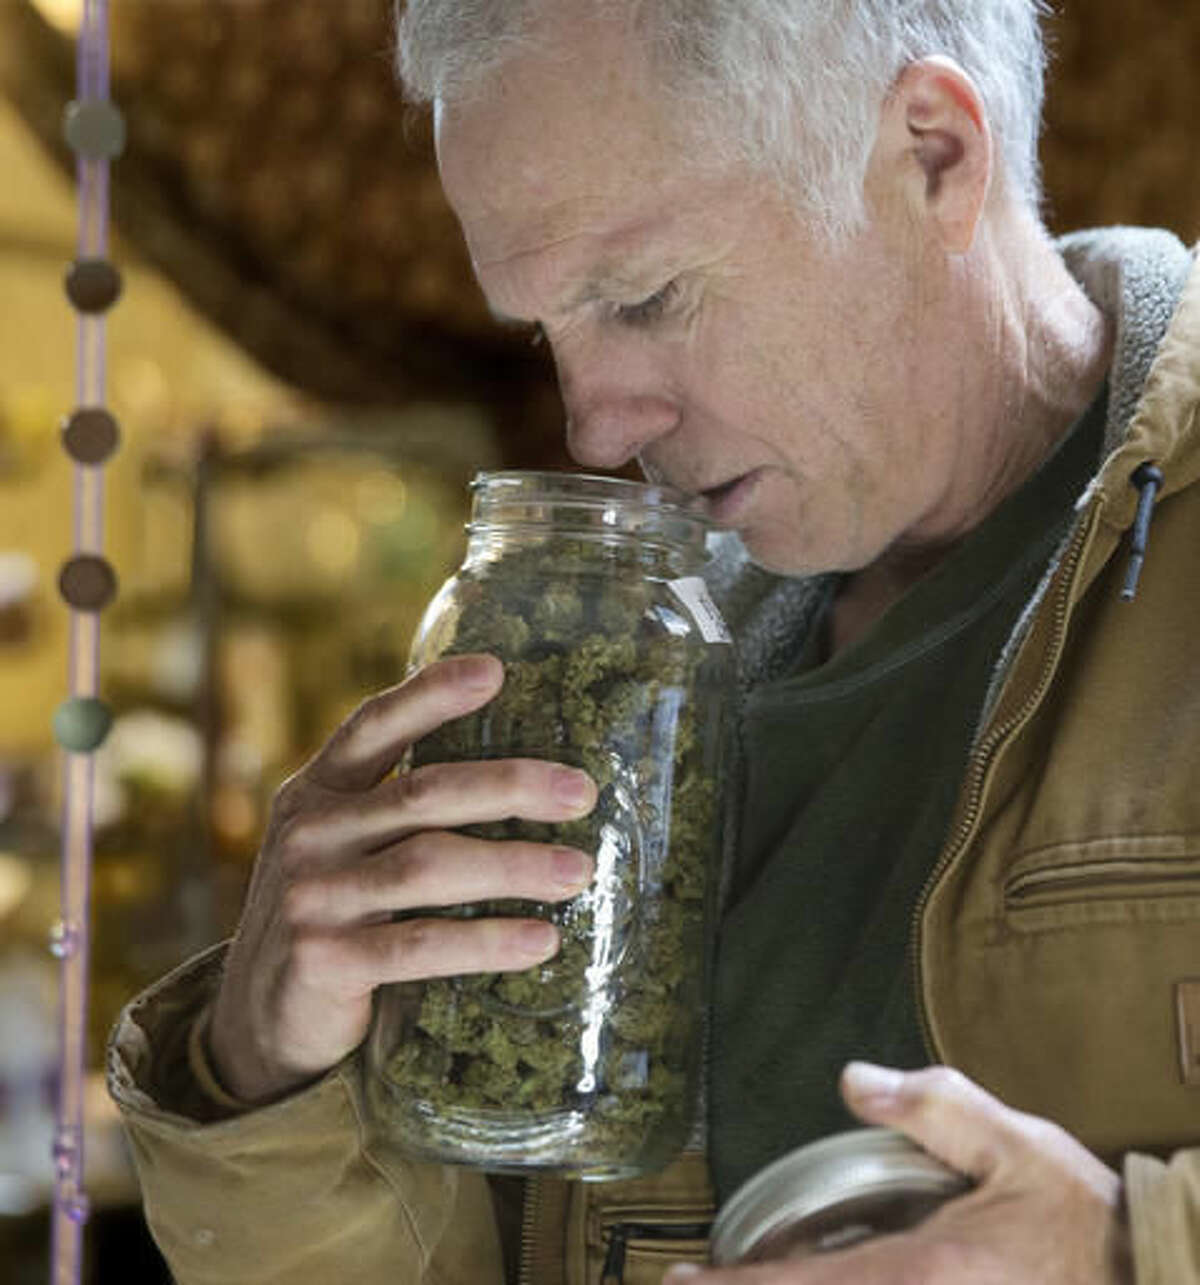 In this Thursday, Oct. 13, 2016 photo, Tim Blake checks the aroma of a jar of medical marijuana at his dispensary near Laytonville, Calif. Blake supports the passage of Proposition 64, the November ballot initiative which would legalize the recreational use of marijuana, saying it's the next big step for an industry emerging from the shadows. (AP Photo/Rich Pedroncelli)